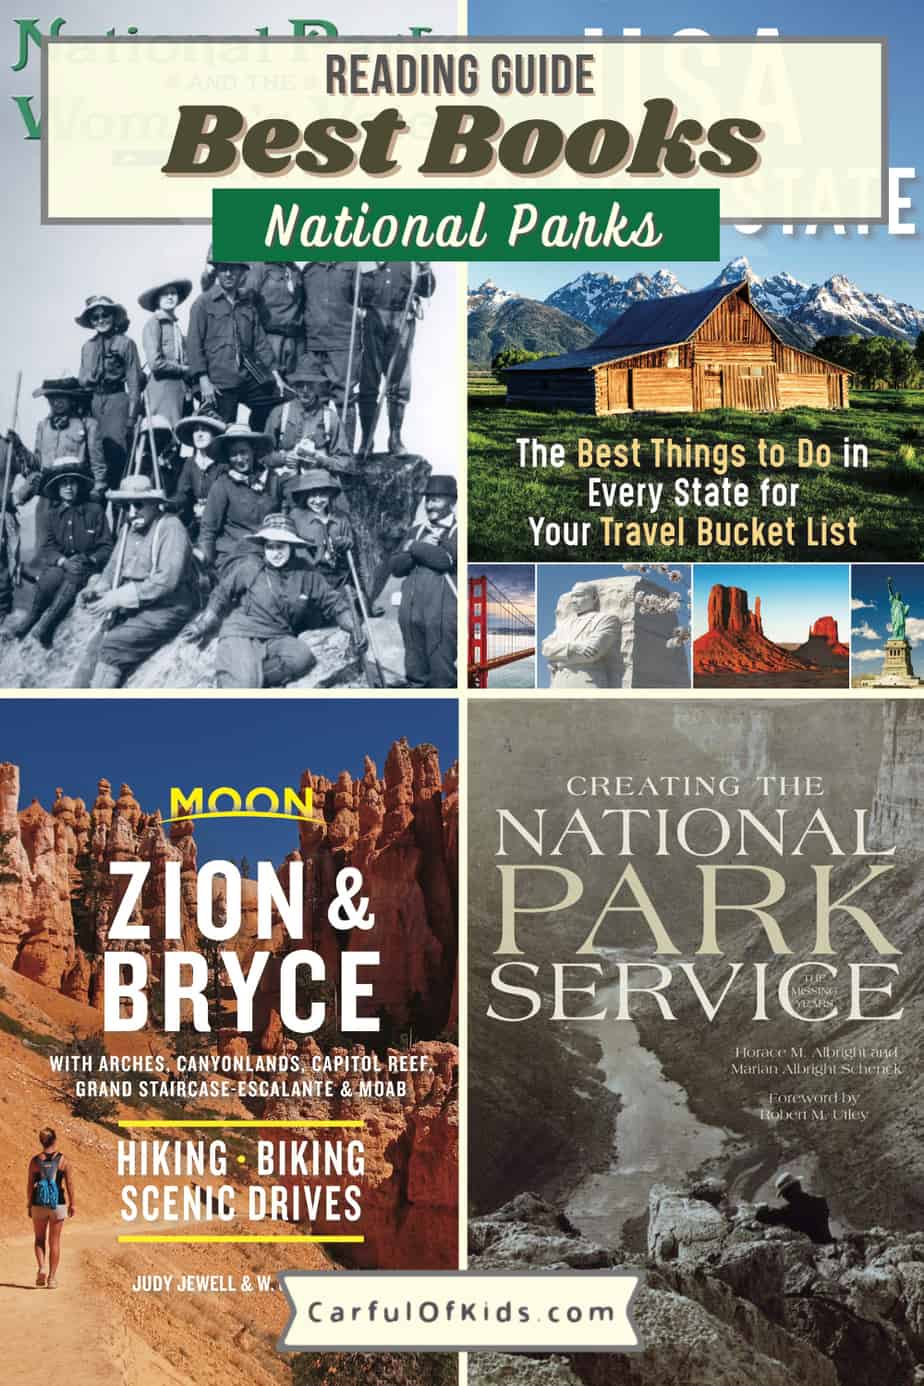 Grab the perfect book for yourself, or the outdoor adventurer, history buff or the kids in your life. Find a book about the National Parks for everyone, including those who don't camp. Find riveting accounts of survival as well. Best Books for National Park Fans | Books about the National Parks #NationalParks #TravelBooks #Books